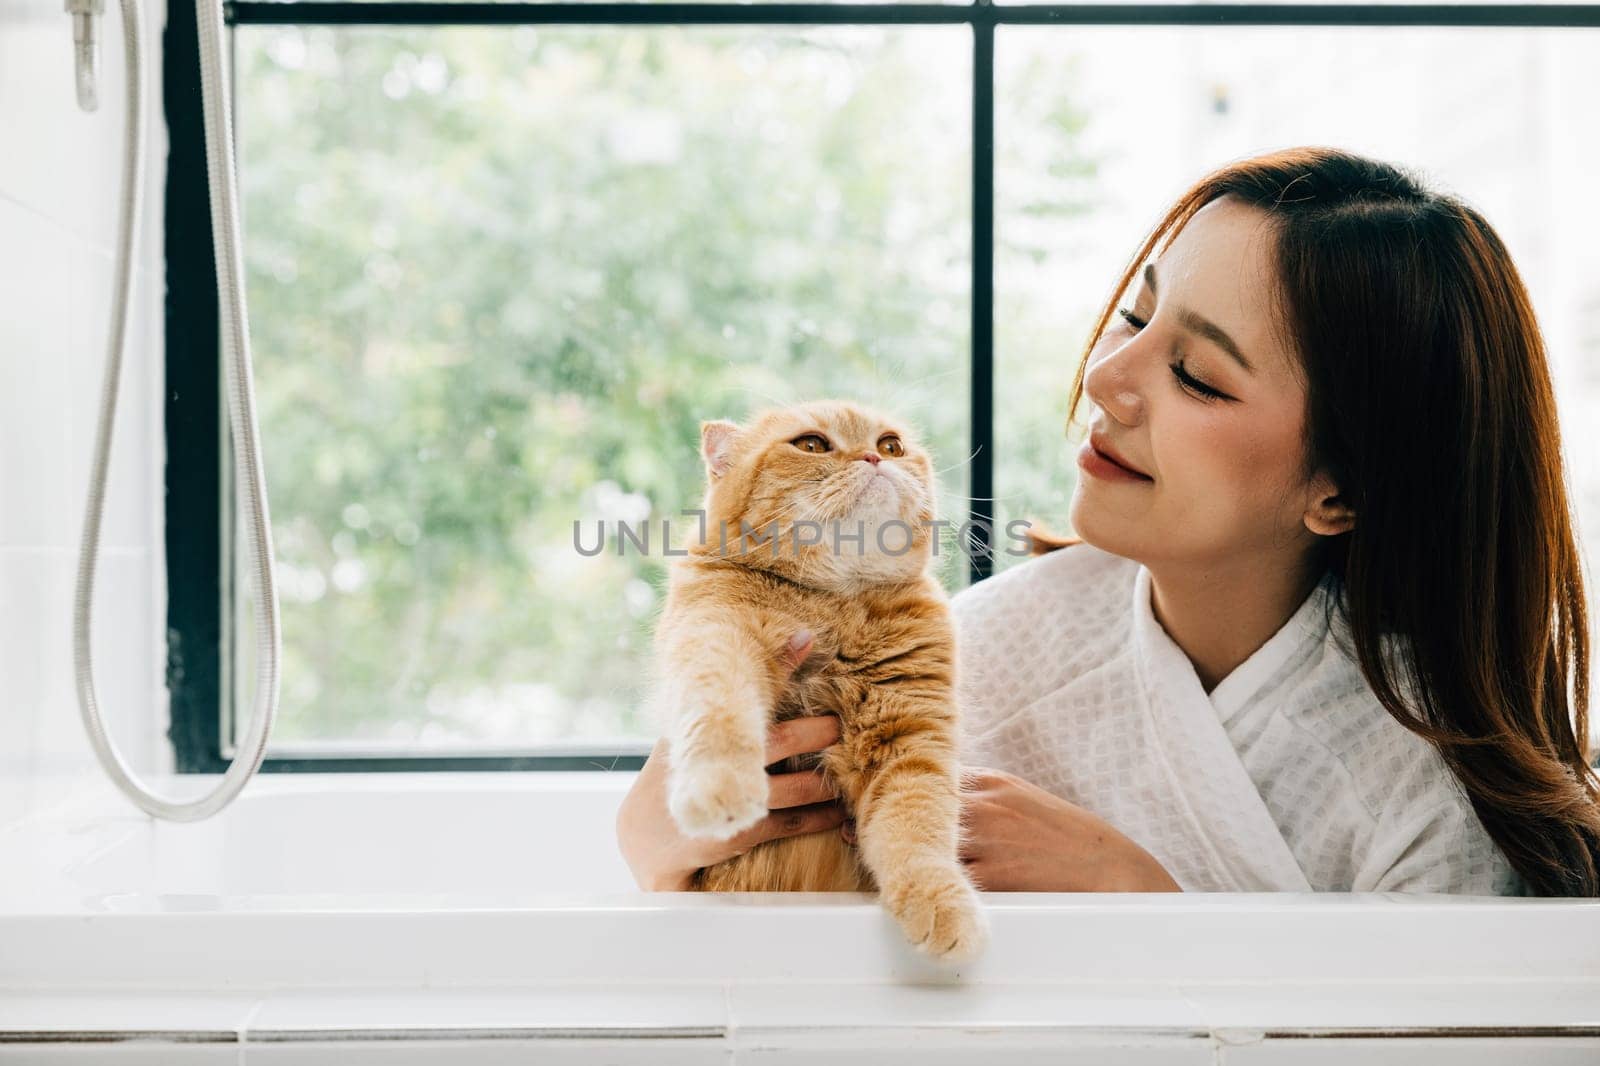 Bath time bonding, a woman holds her Scottish Fold cat in the bathtub, radiating happiness and the warmth of pet companionship in the bathroom. by Sorapop